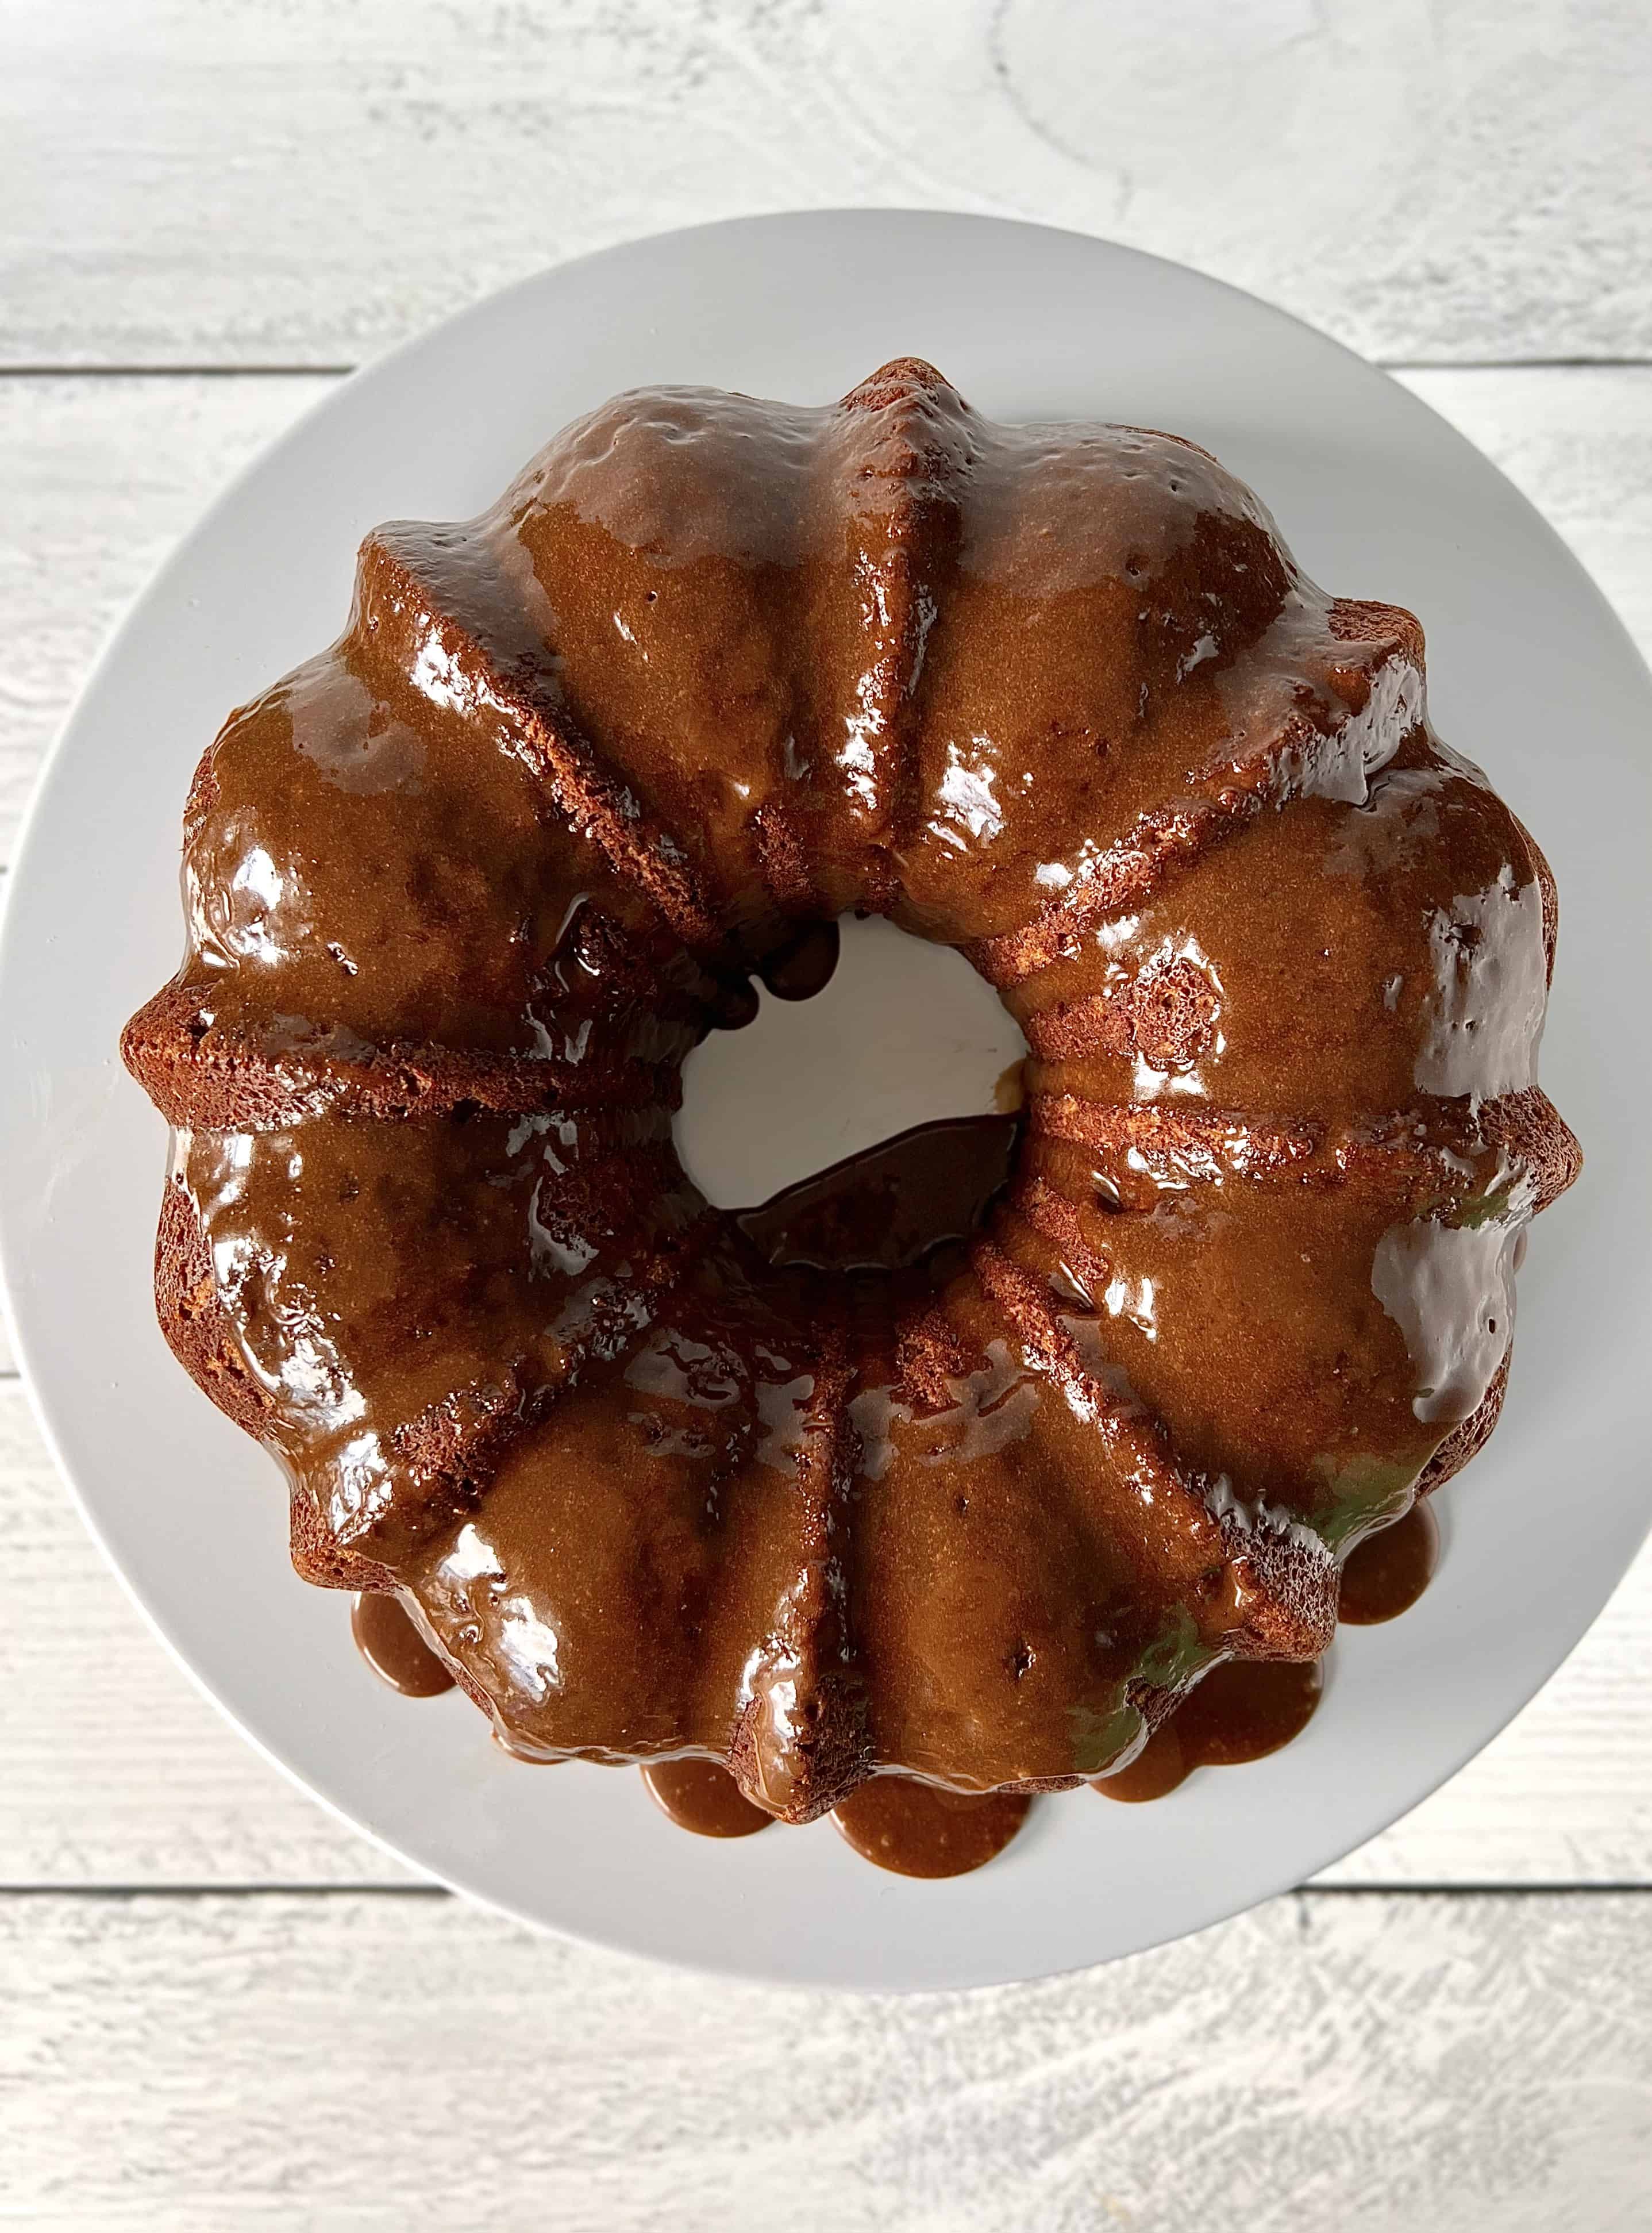 gluten-free pumpkin bundt cake coated in a dripping caramel sauce, on a white cake stand over a white wooden table